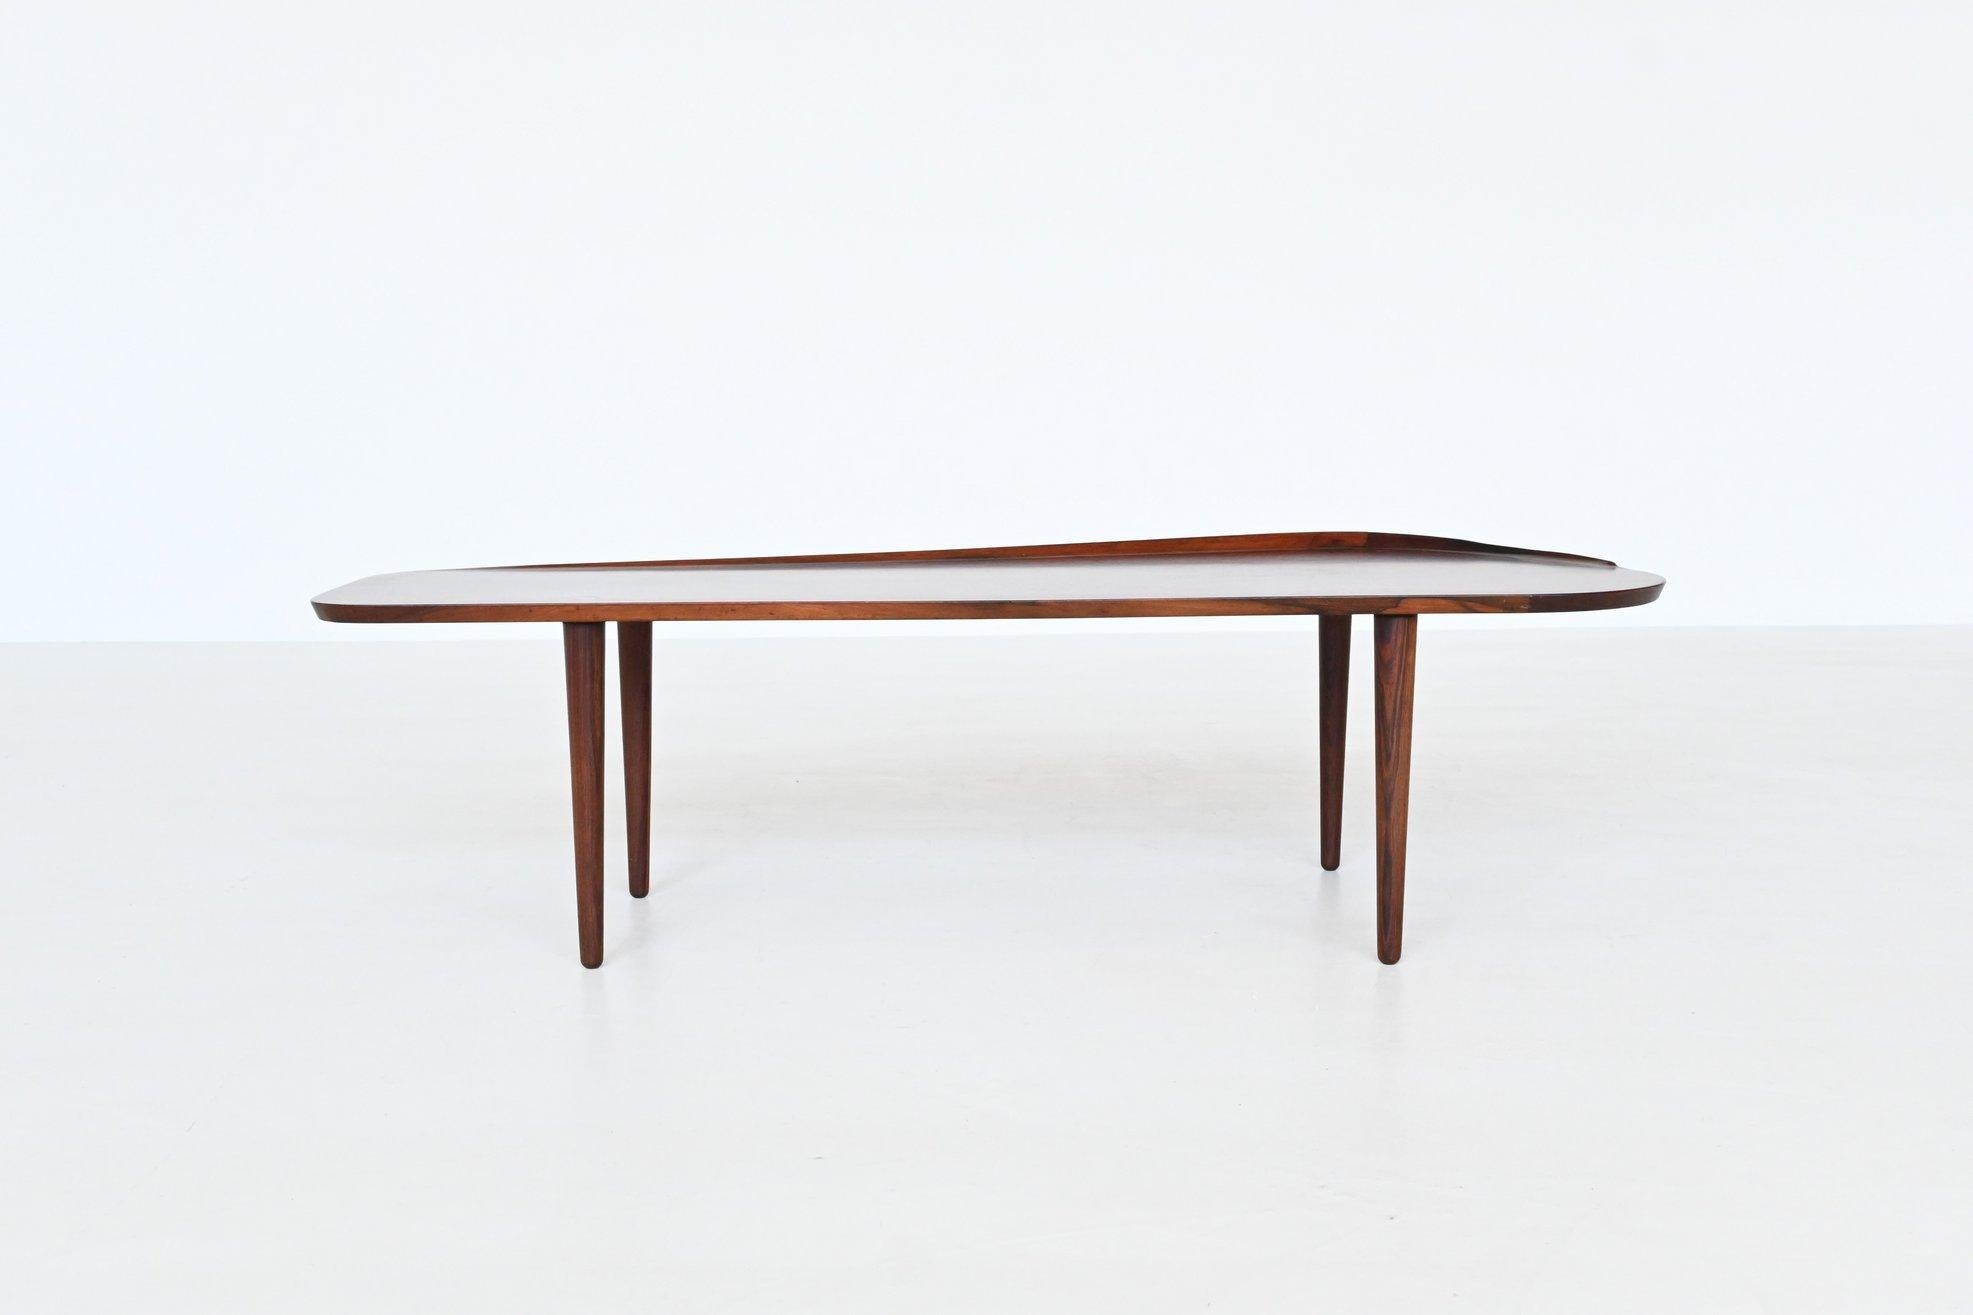 Beautiful long shaped coffee table designed by Arne Hovmand-Olsen for Jutex, Denmark 1958. The table has a nice asymmetrical surfboard-shaped top and the legs are slightly tapered, which is a subtle yet important detail. The rising edge at the back